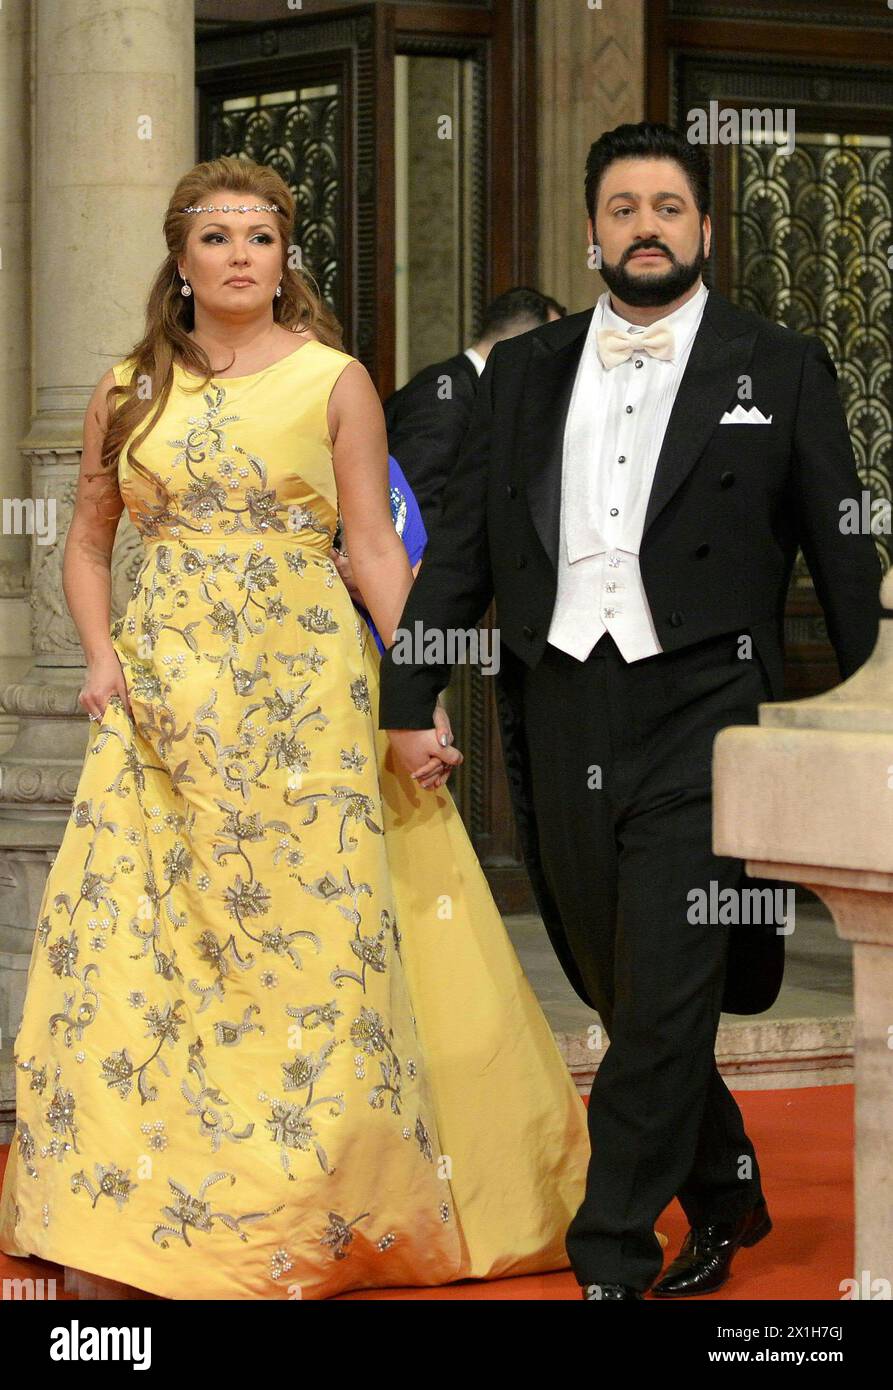 Traditional Vienna Opera Ball at the Wiener Staatsoper (Vienna State Opera), in Vienna, Austria, 23 February 2017. In the picture: Opera singer Anna Netrebko and her husband Yusif Eyvazov. - 20170223 PD8047 - Rechteinfo: Rights Managed (RM) Stock Photo